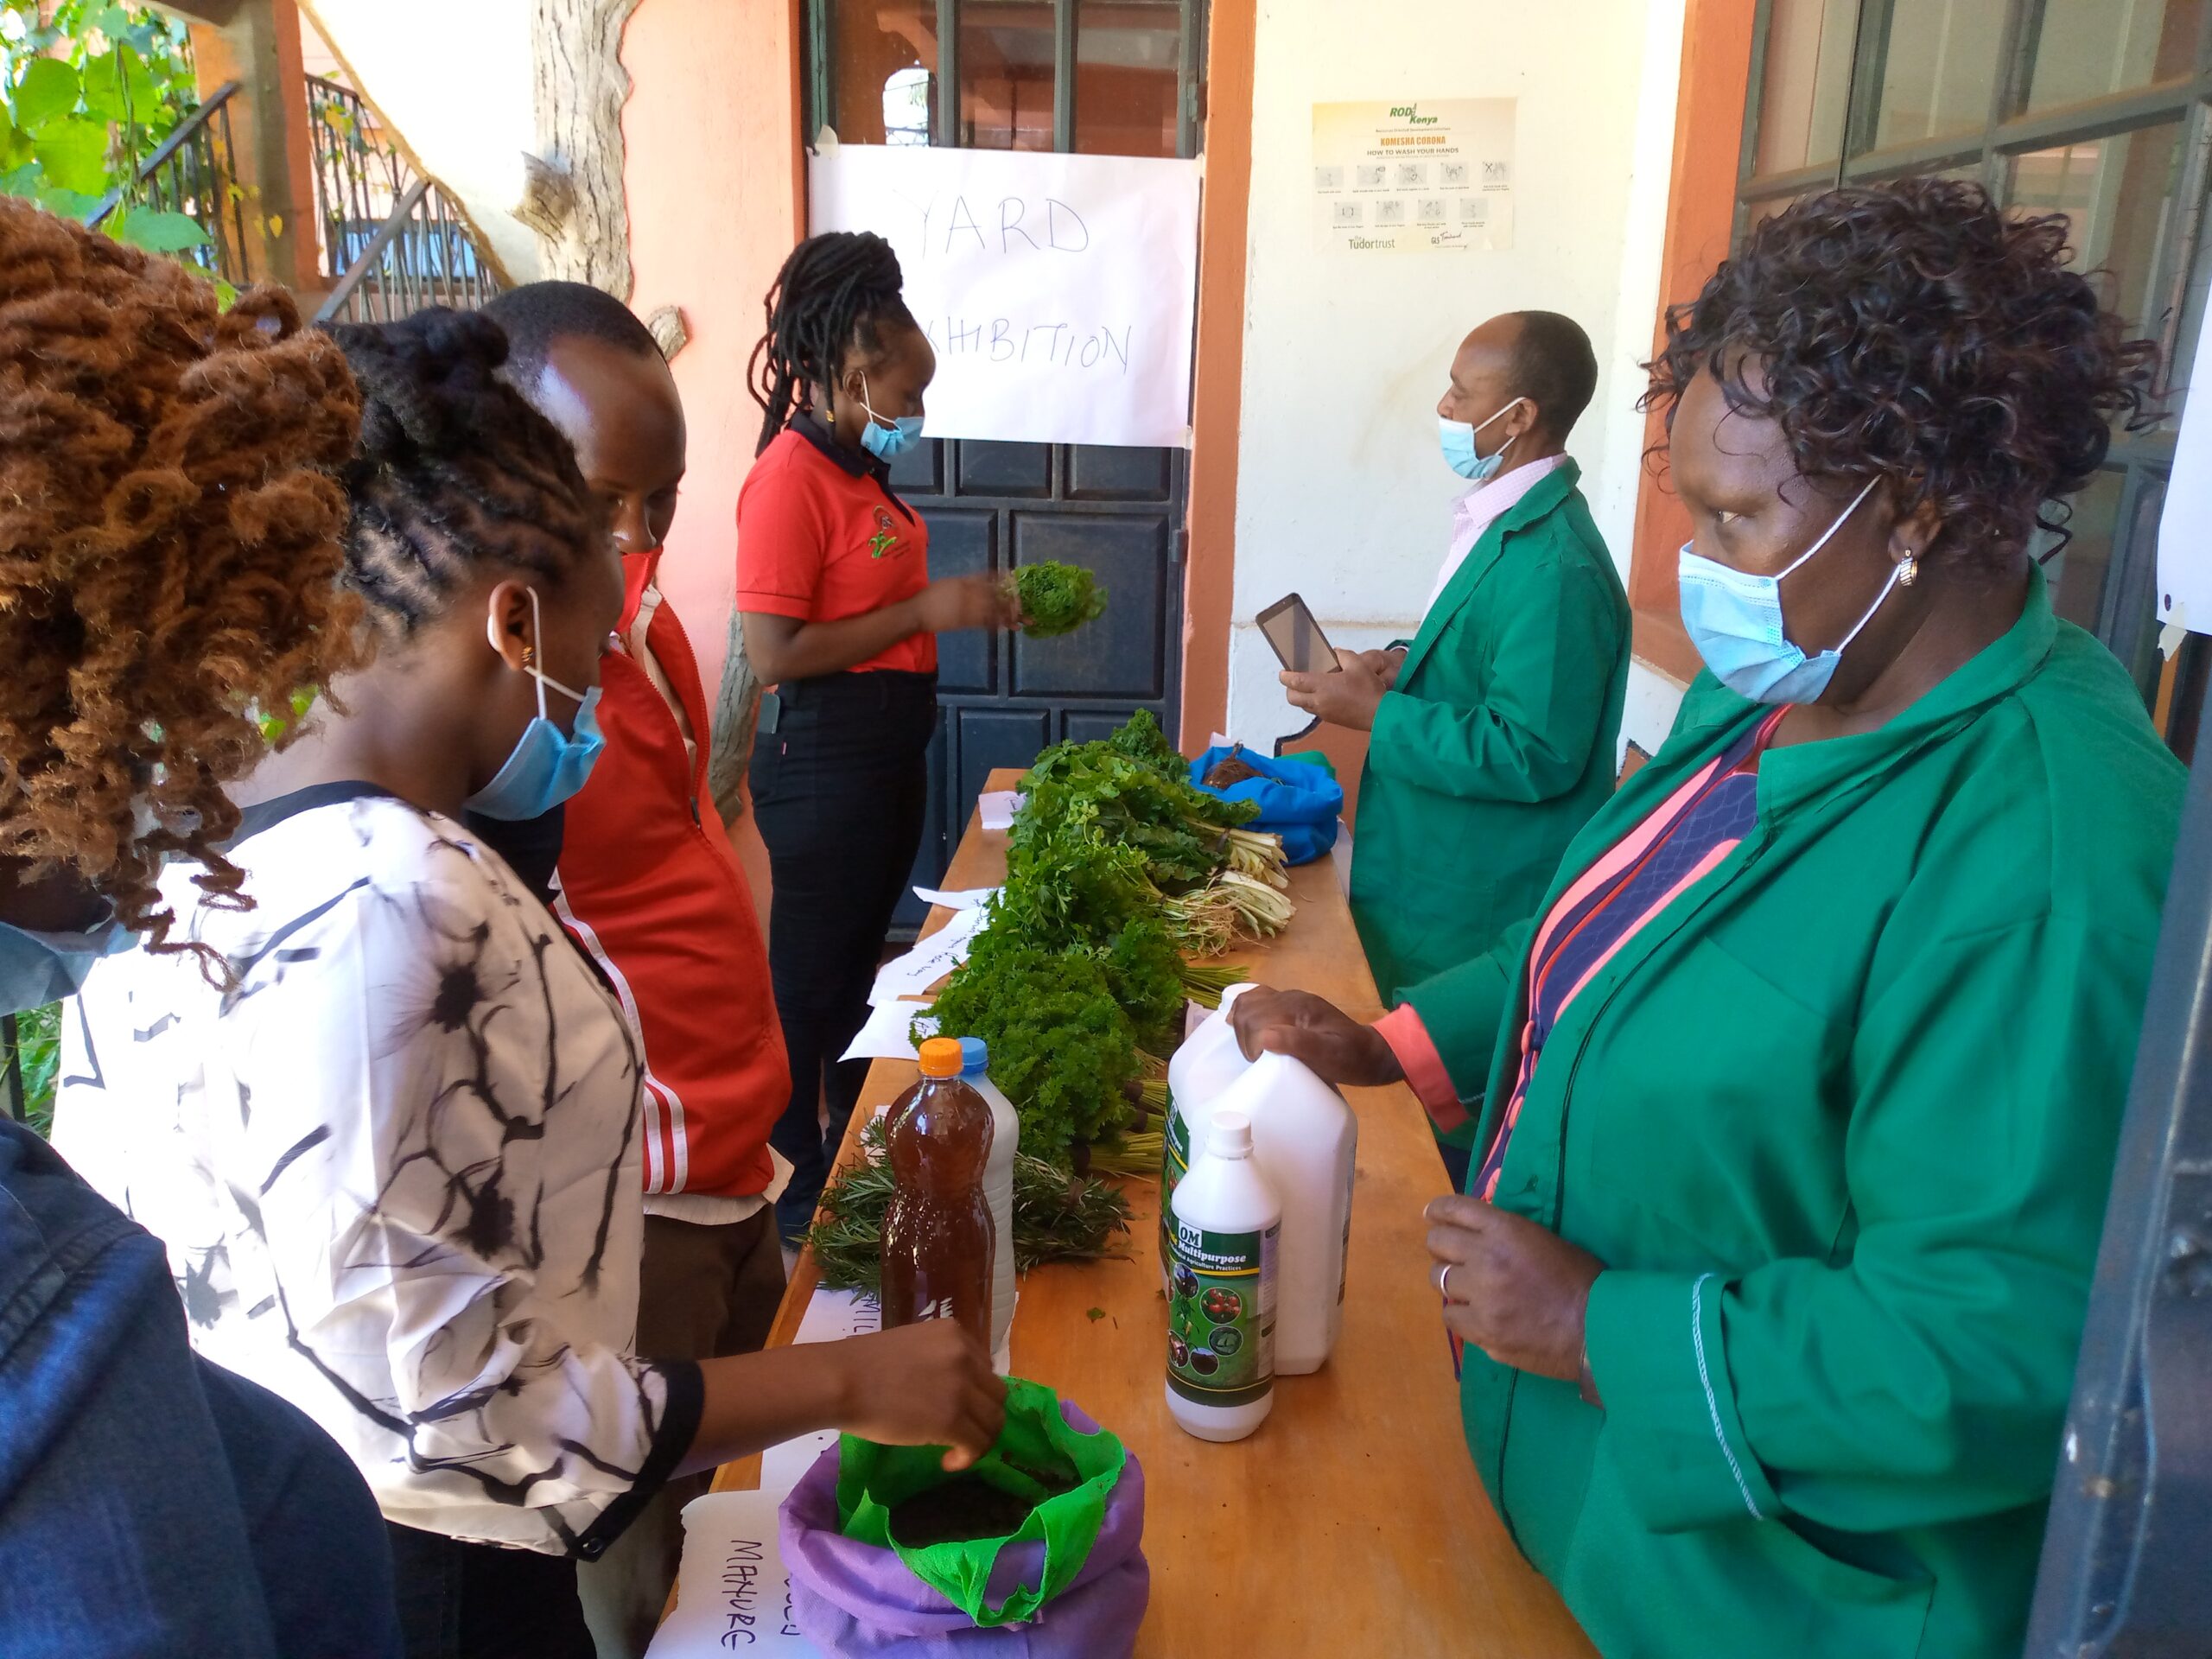 OACK Farmer showcasing her products during the 2020 World Soil Day Celebrations